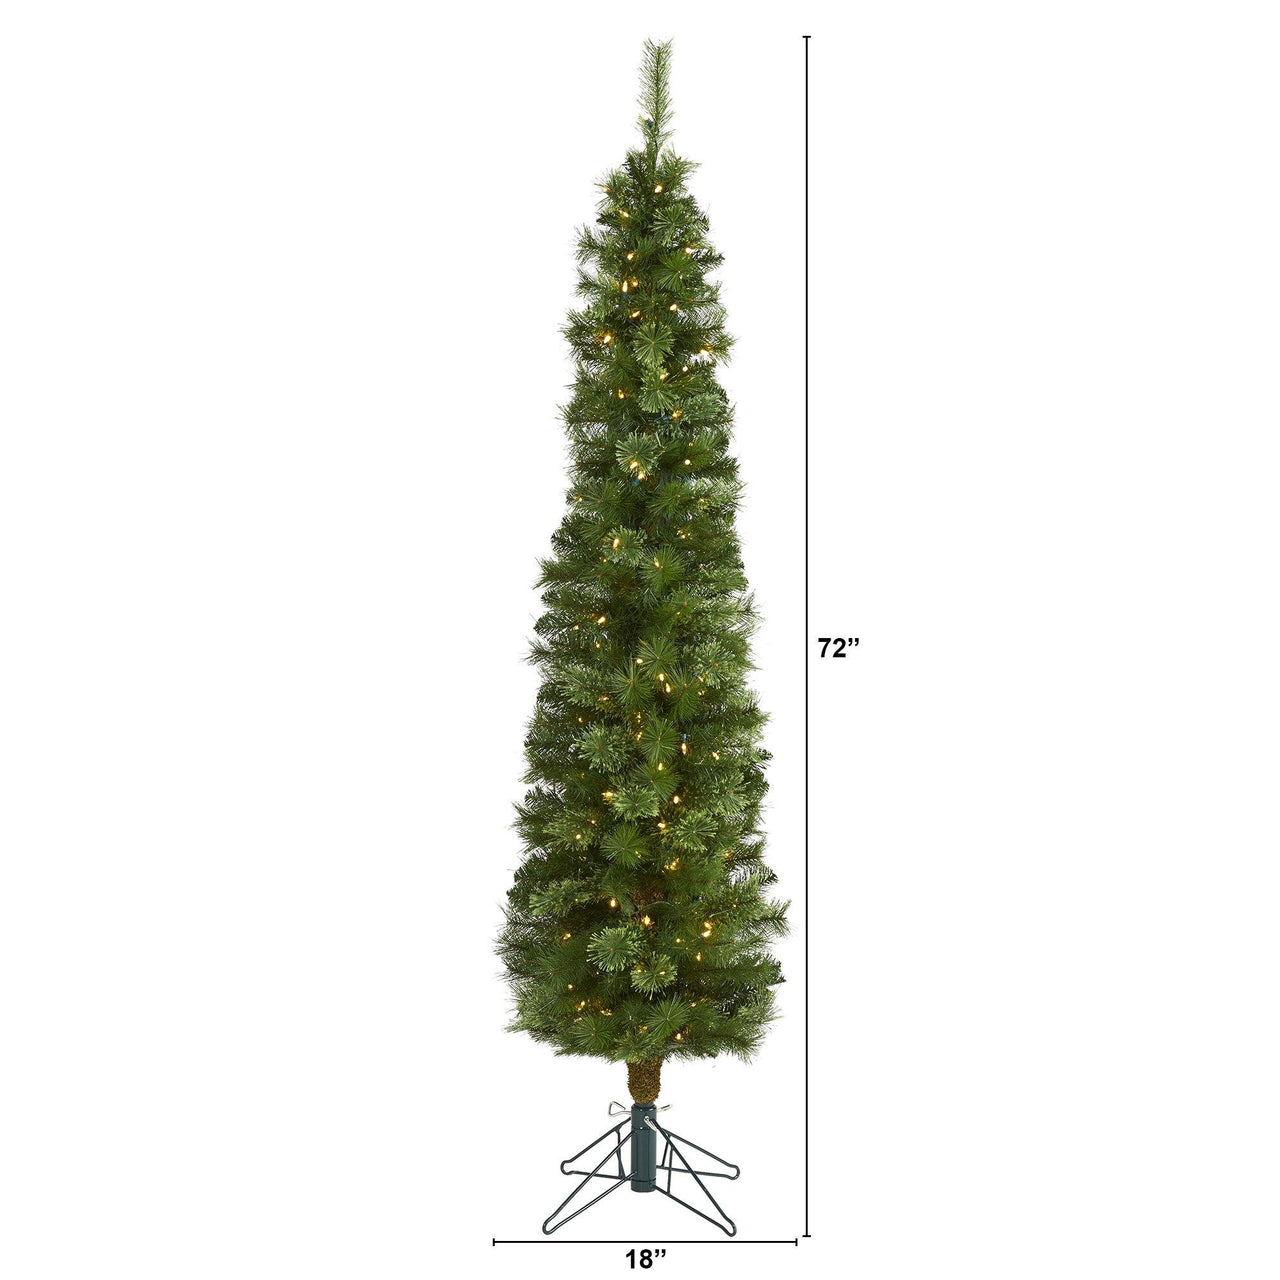 6' Green Pencil Artificial Christmas Tree with 150 Clear (Multifunction) LED Lights and 264 Bendable Branches - The Fox Decor